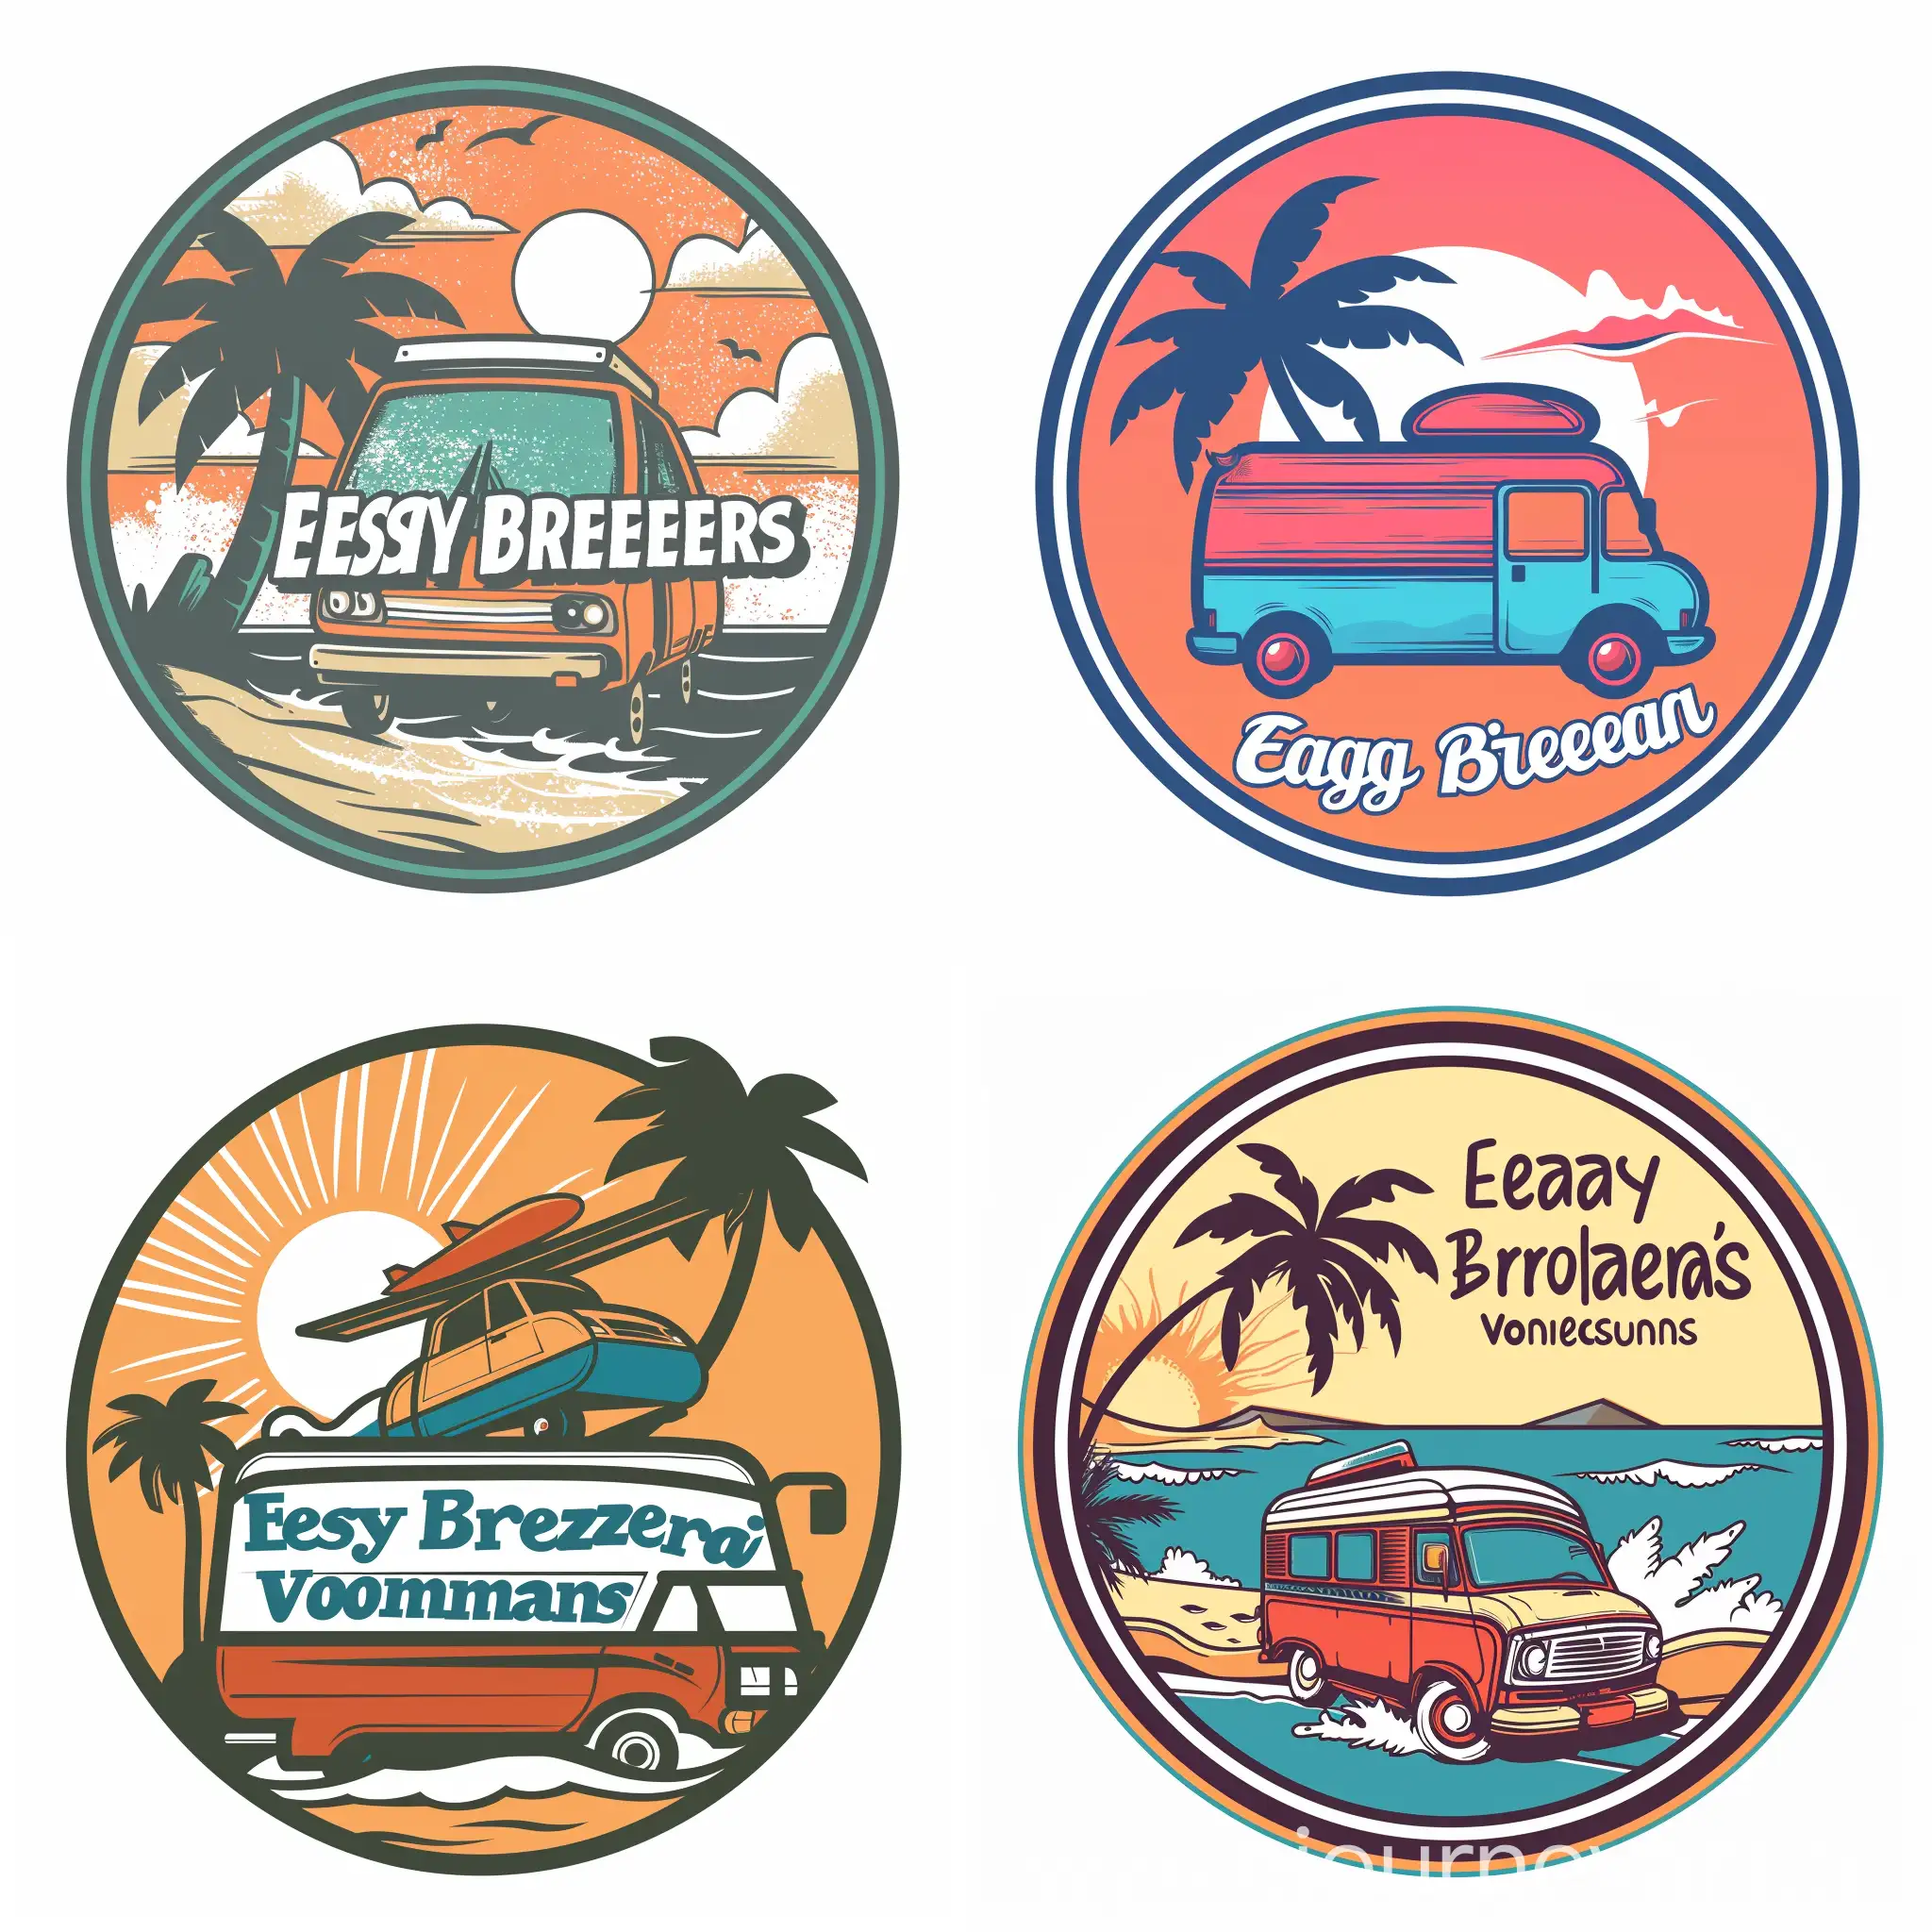 Relaxing-Beach-Getaway-for-Easy-Breezy-Vacations-Logo